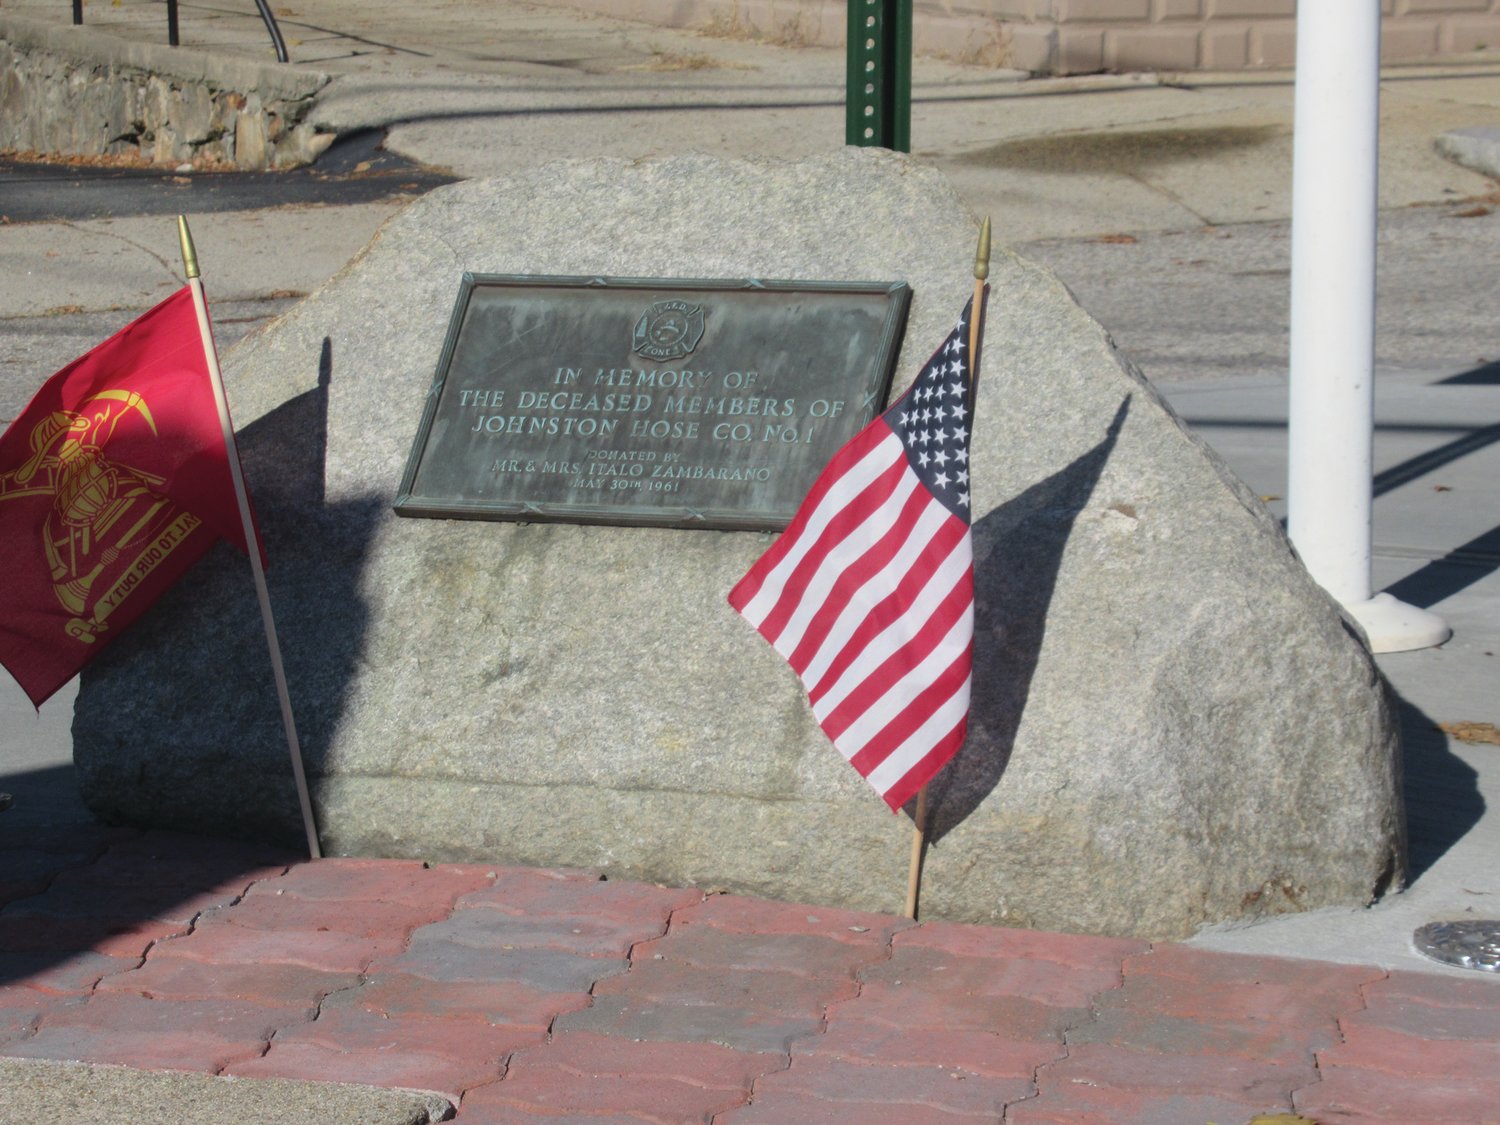 MARVELOUS MEMORIAL: “In memory of all deceased members of Johnston Hose Company No. l are the words inscribed on this ageless plaque that’s surrounded by an American and Firefighter flags and sits at the intersection of Plainfield and School Street in Johnston.